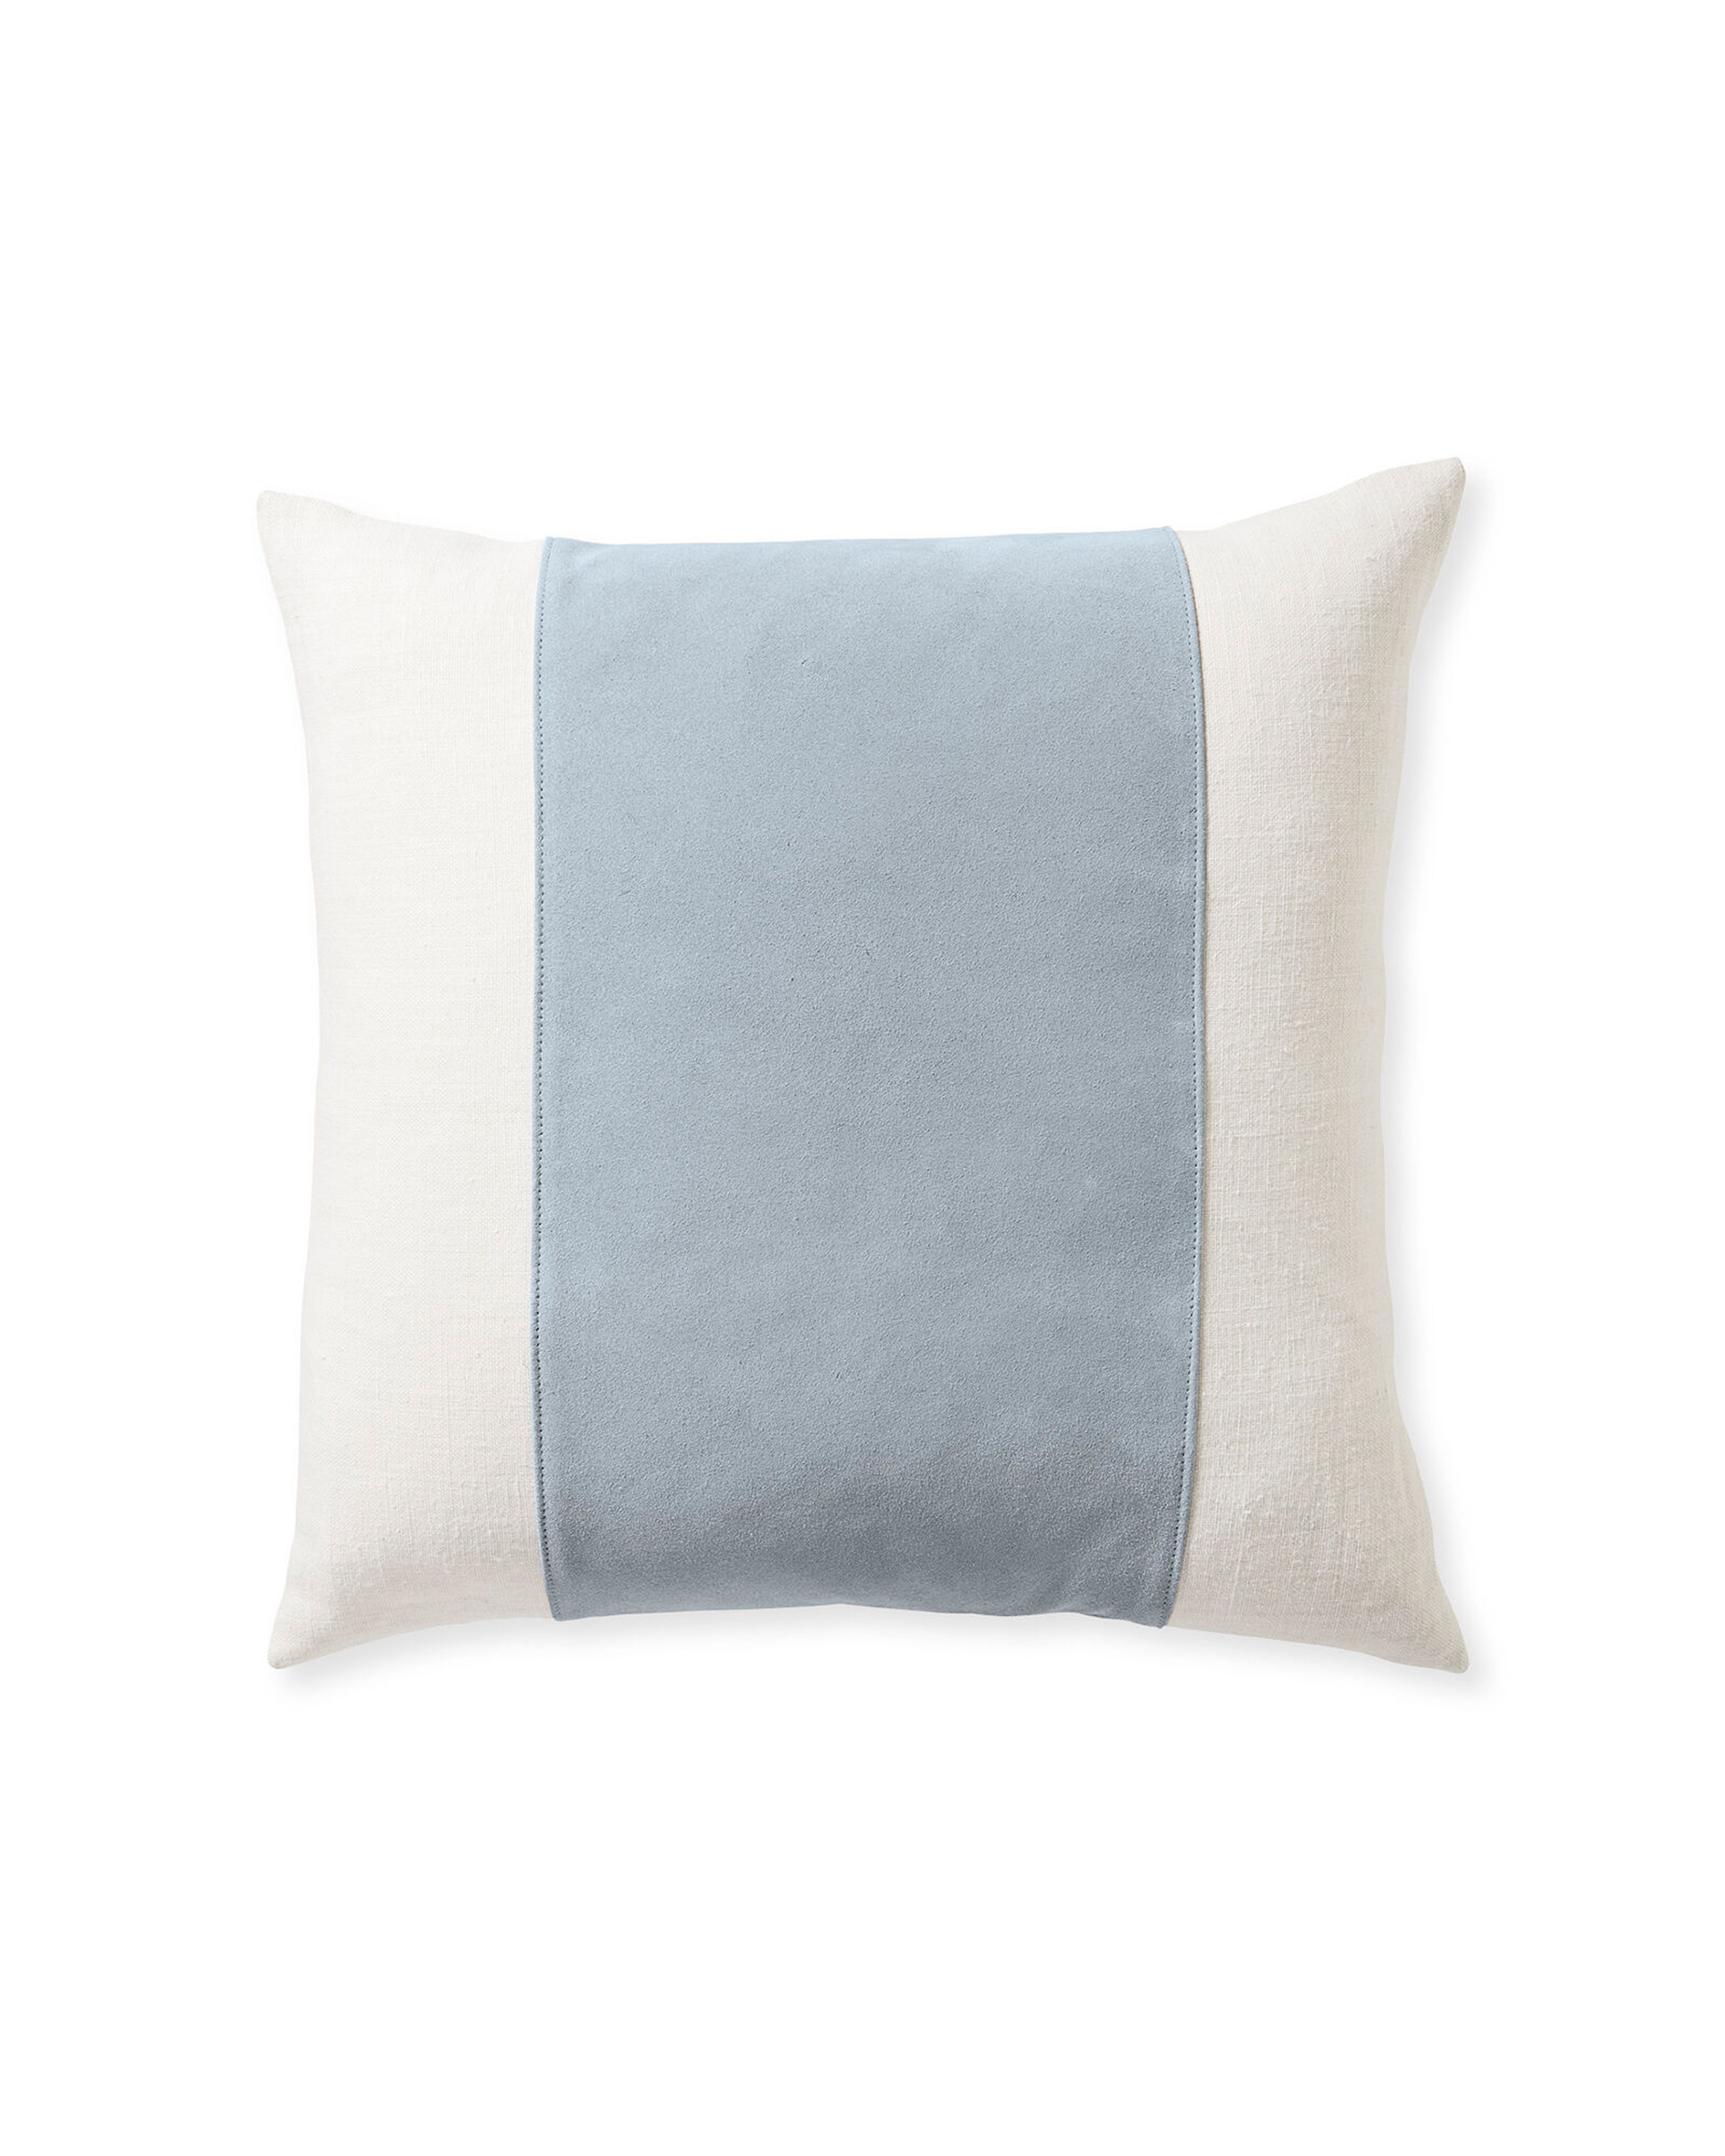 North Lake Pillow Cover - Serena and Lily